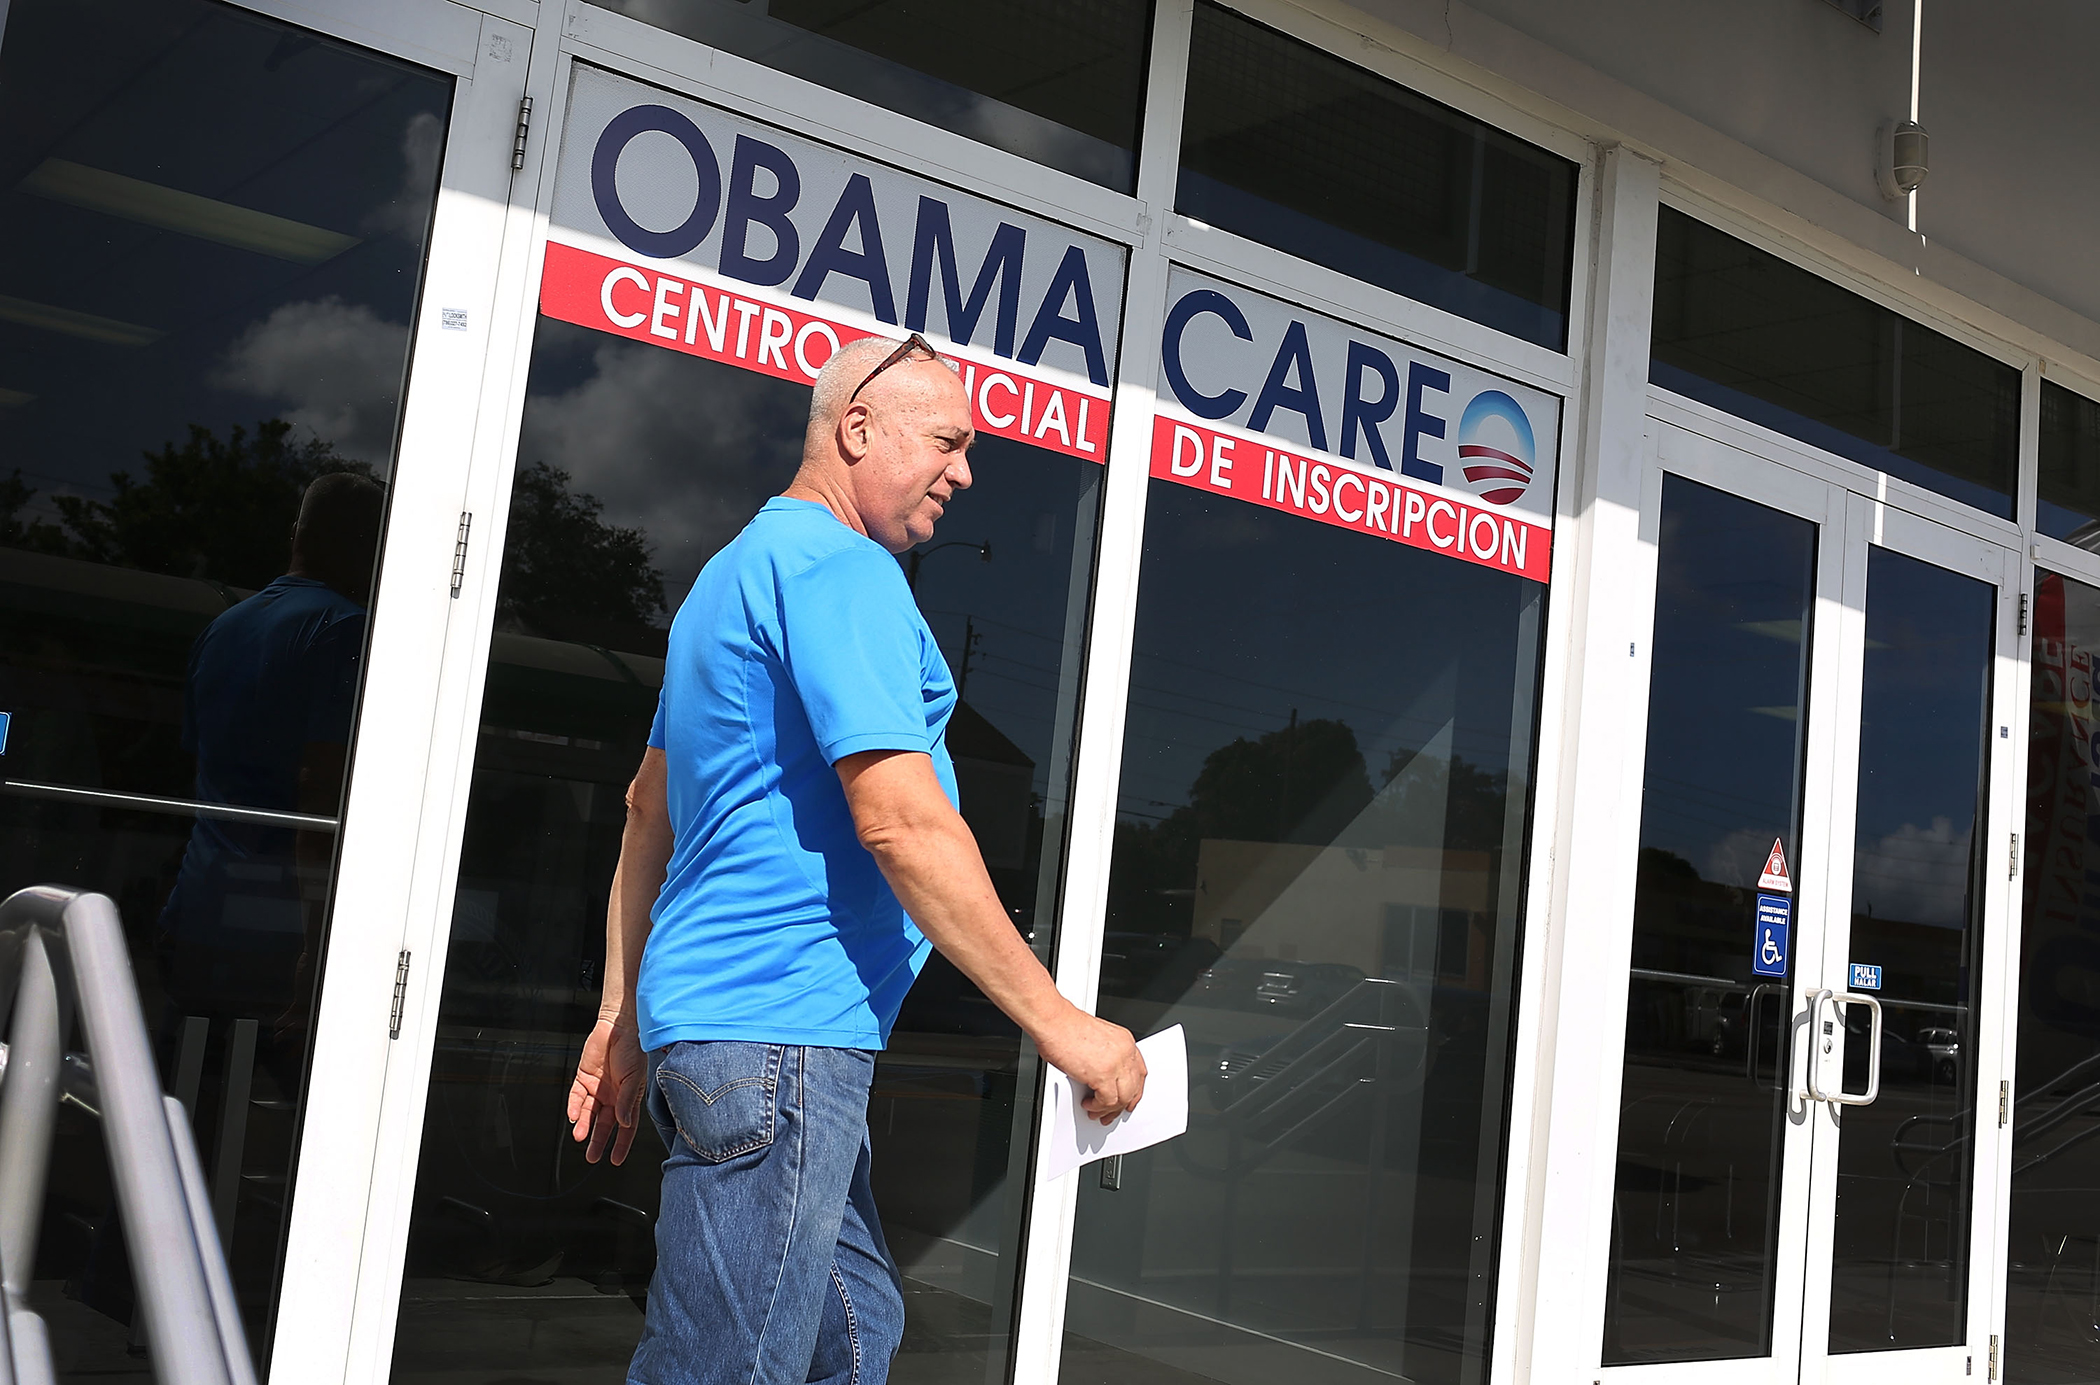 Alberto Abin walks out of the UniVista Insurance company office after shopping for a health plan under the Affordable Care Act, also known as Obamacare, on December 15, 2015 in Miami, Florida. (Joe Raedle&mdash;Getty Images)